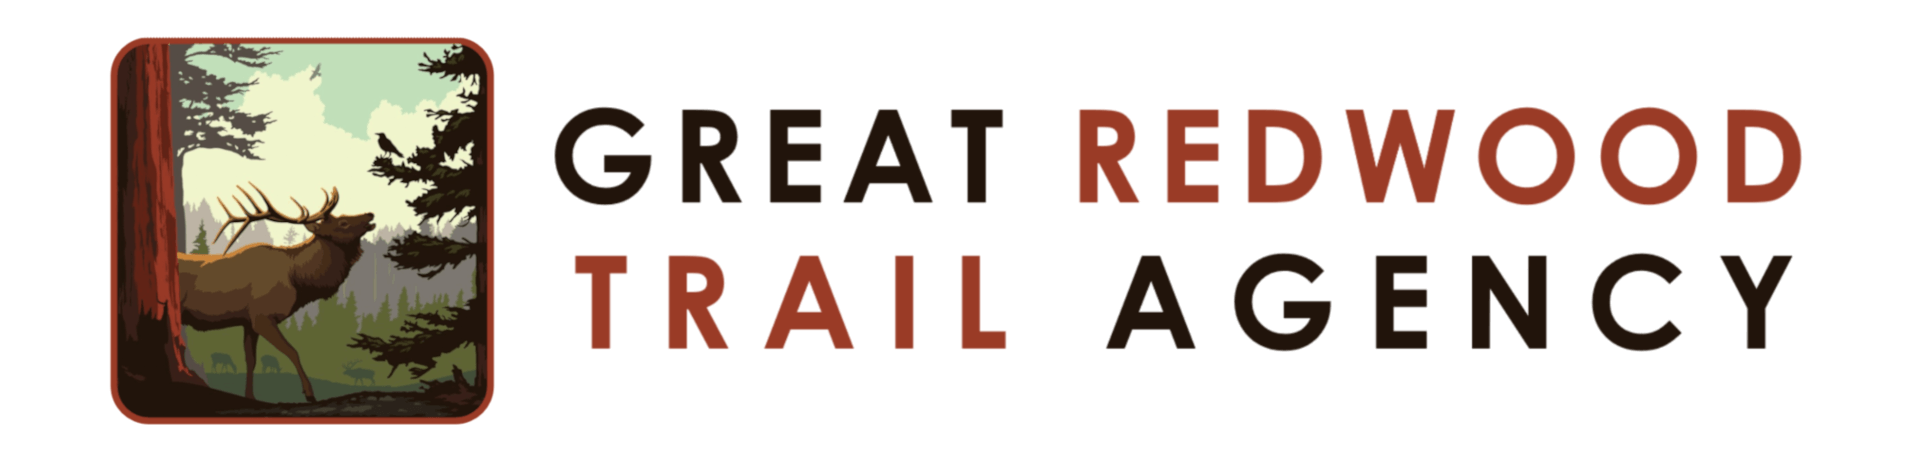 The Great Redwood Trail Agency Header Logo